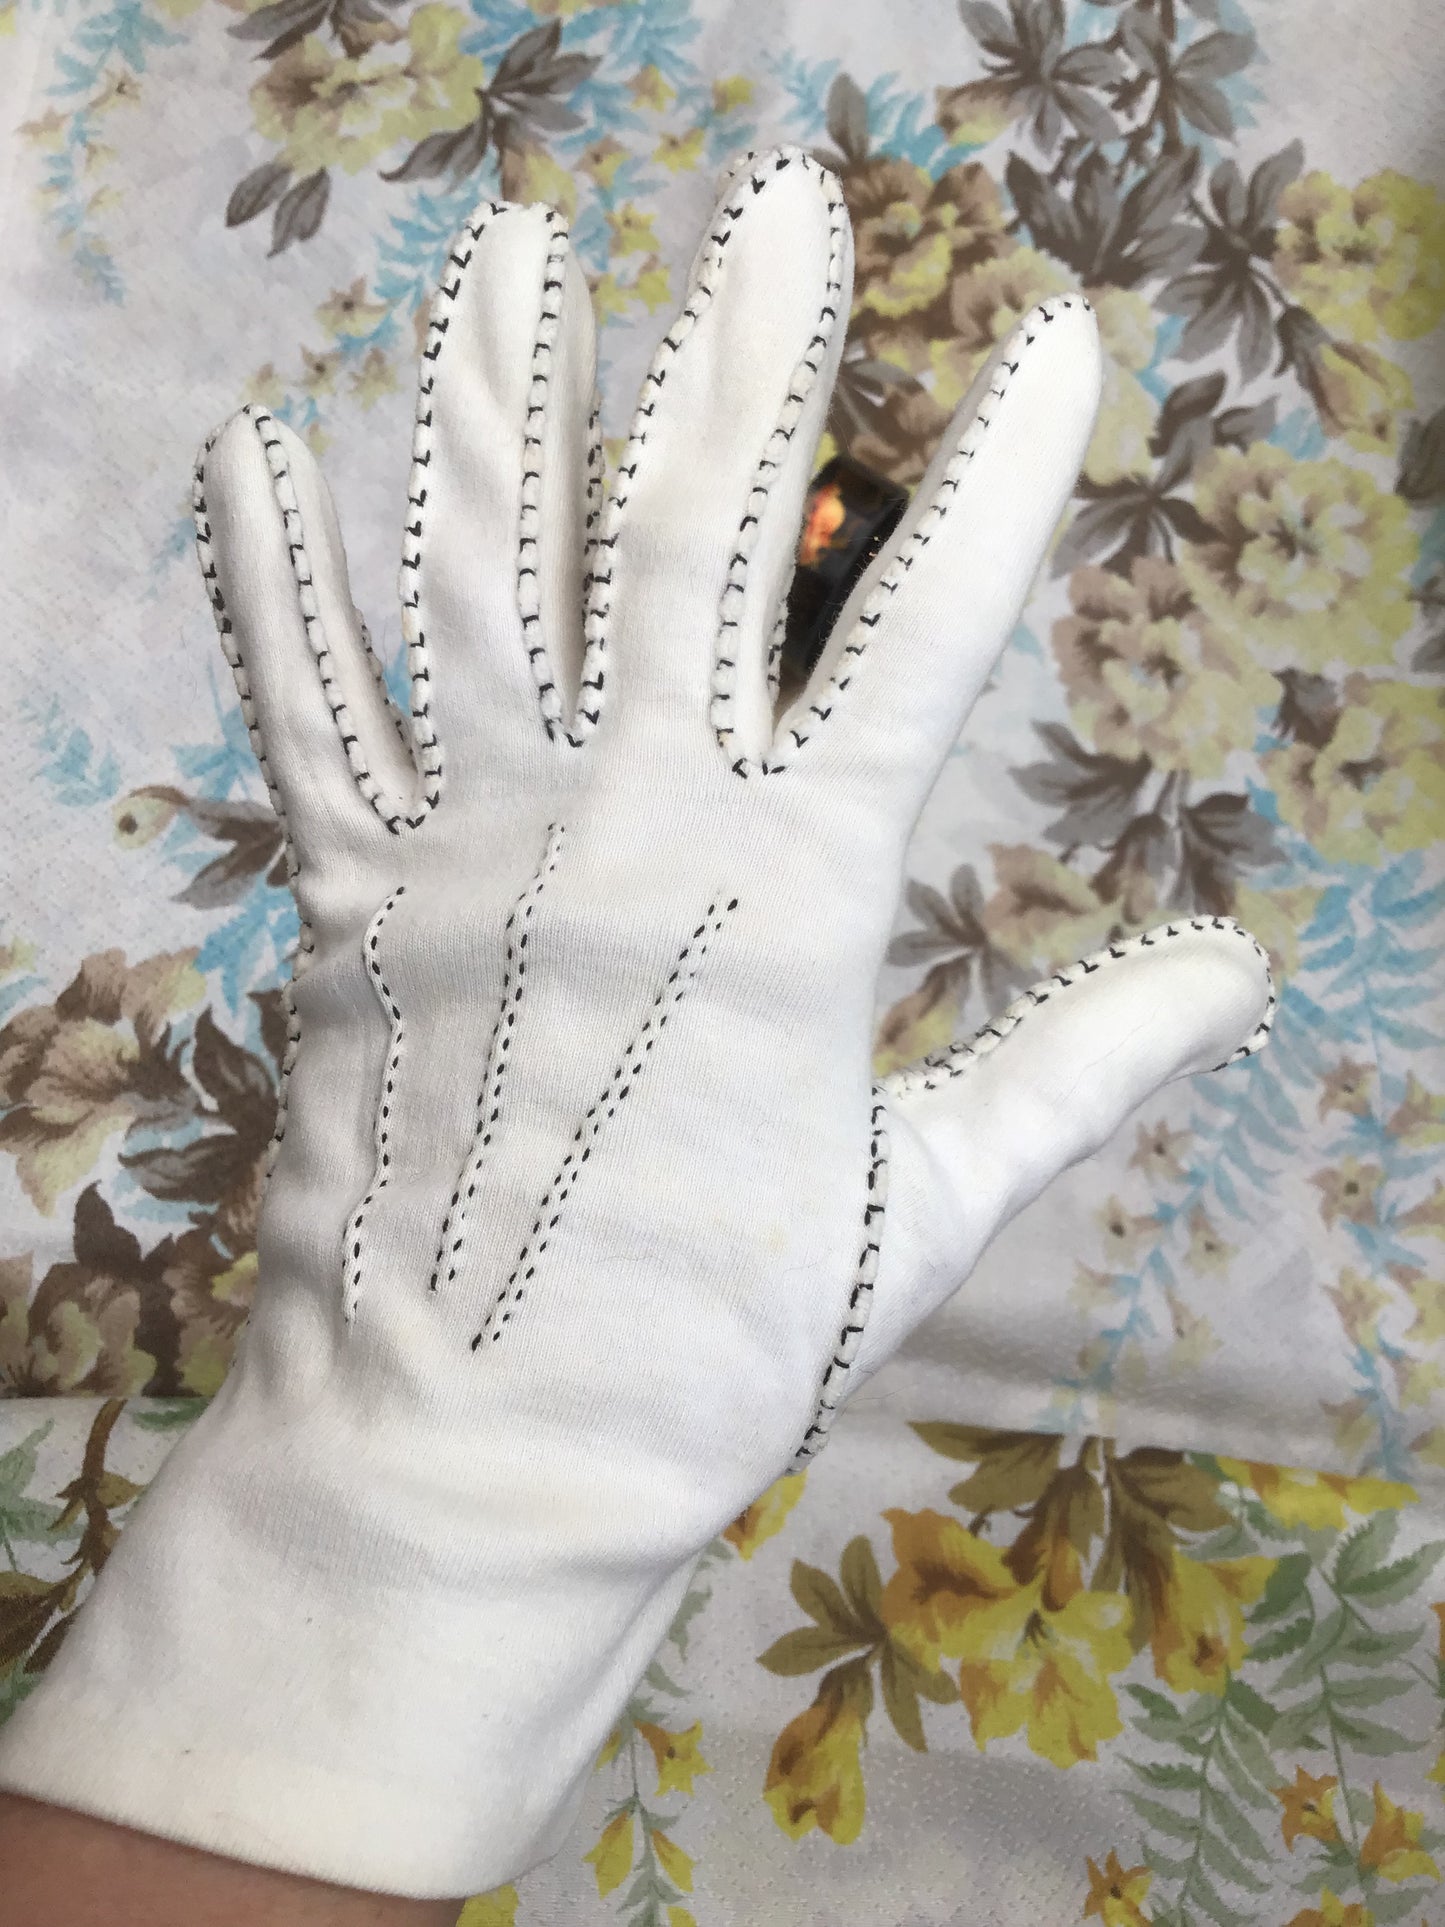 Vintage white cotton gloves, handmade with black contrasting stitching around the seams